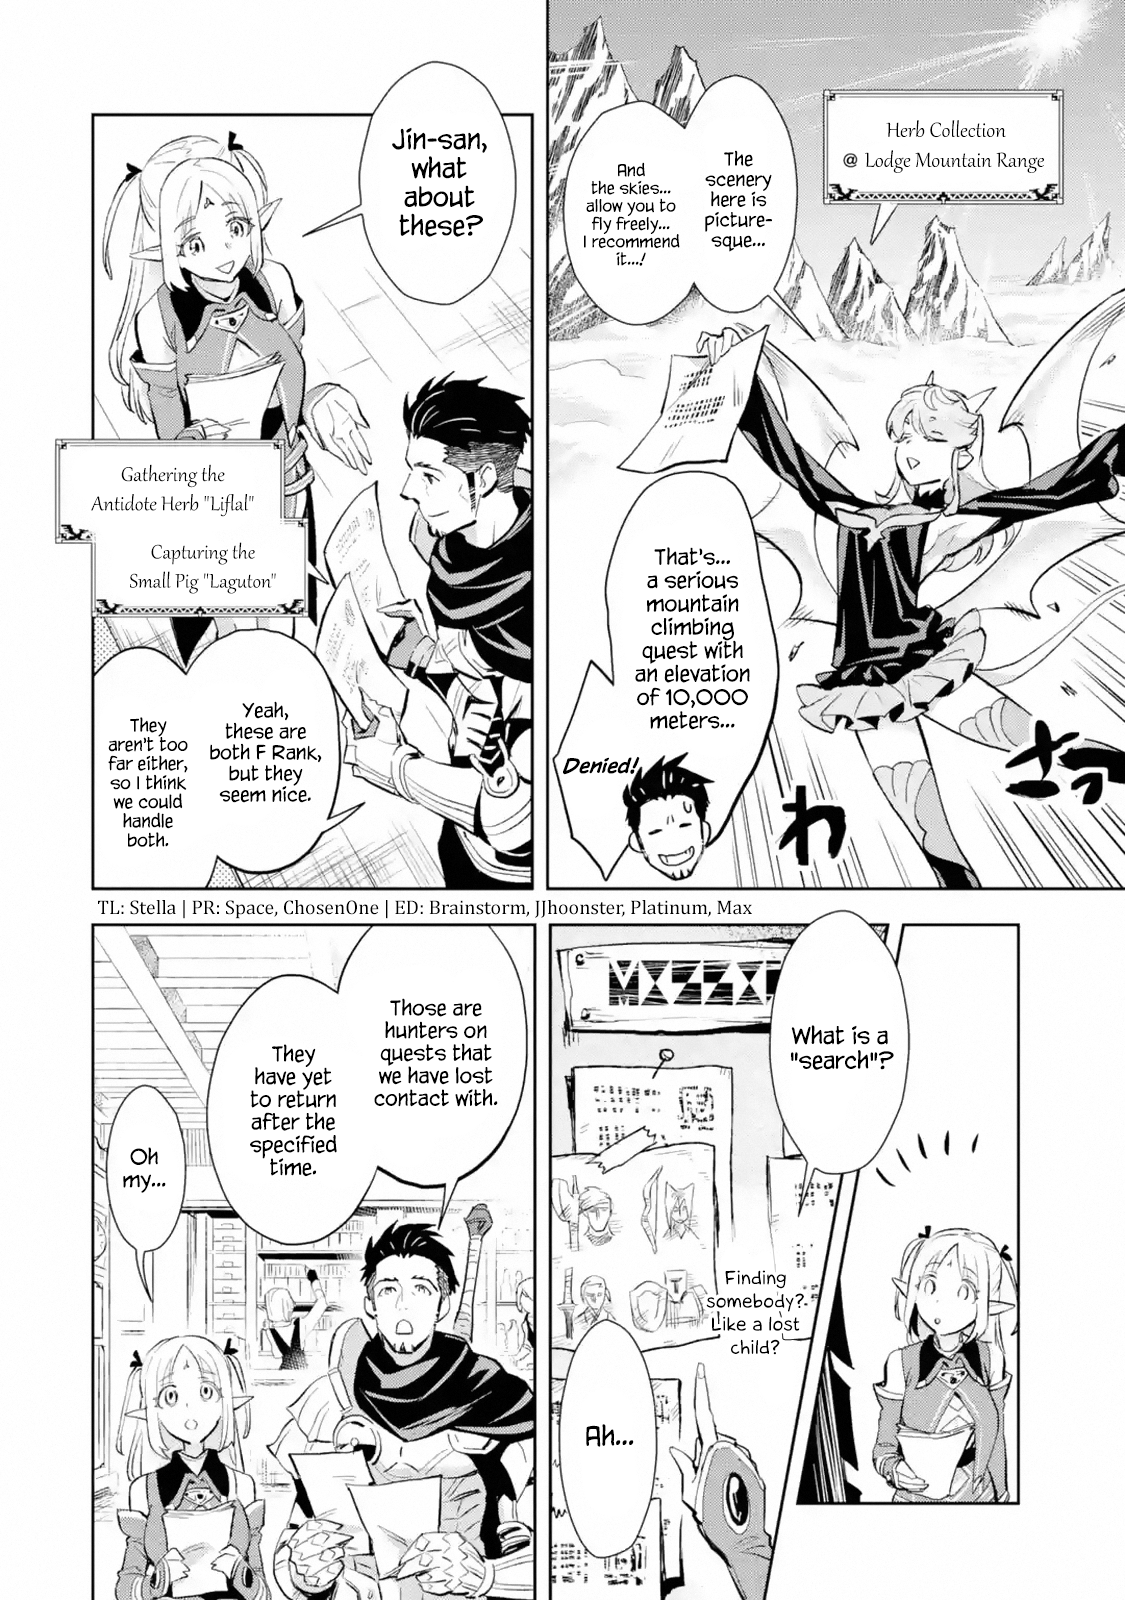 The Ultimate Middle-Aged Hunter Travels To Another World ~This Time, He Wants To Live A Slow And Peaceful Life~ - Page 2